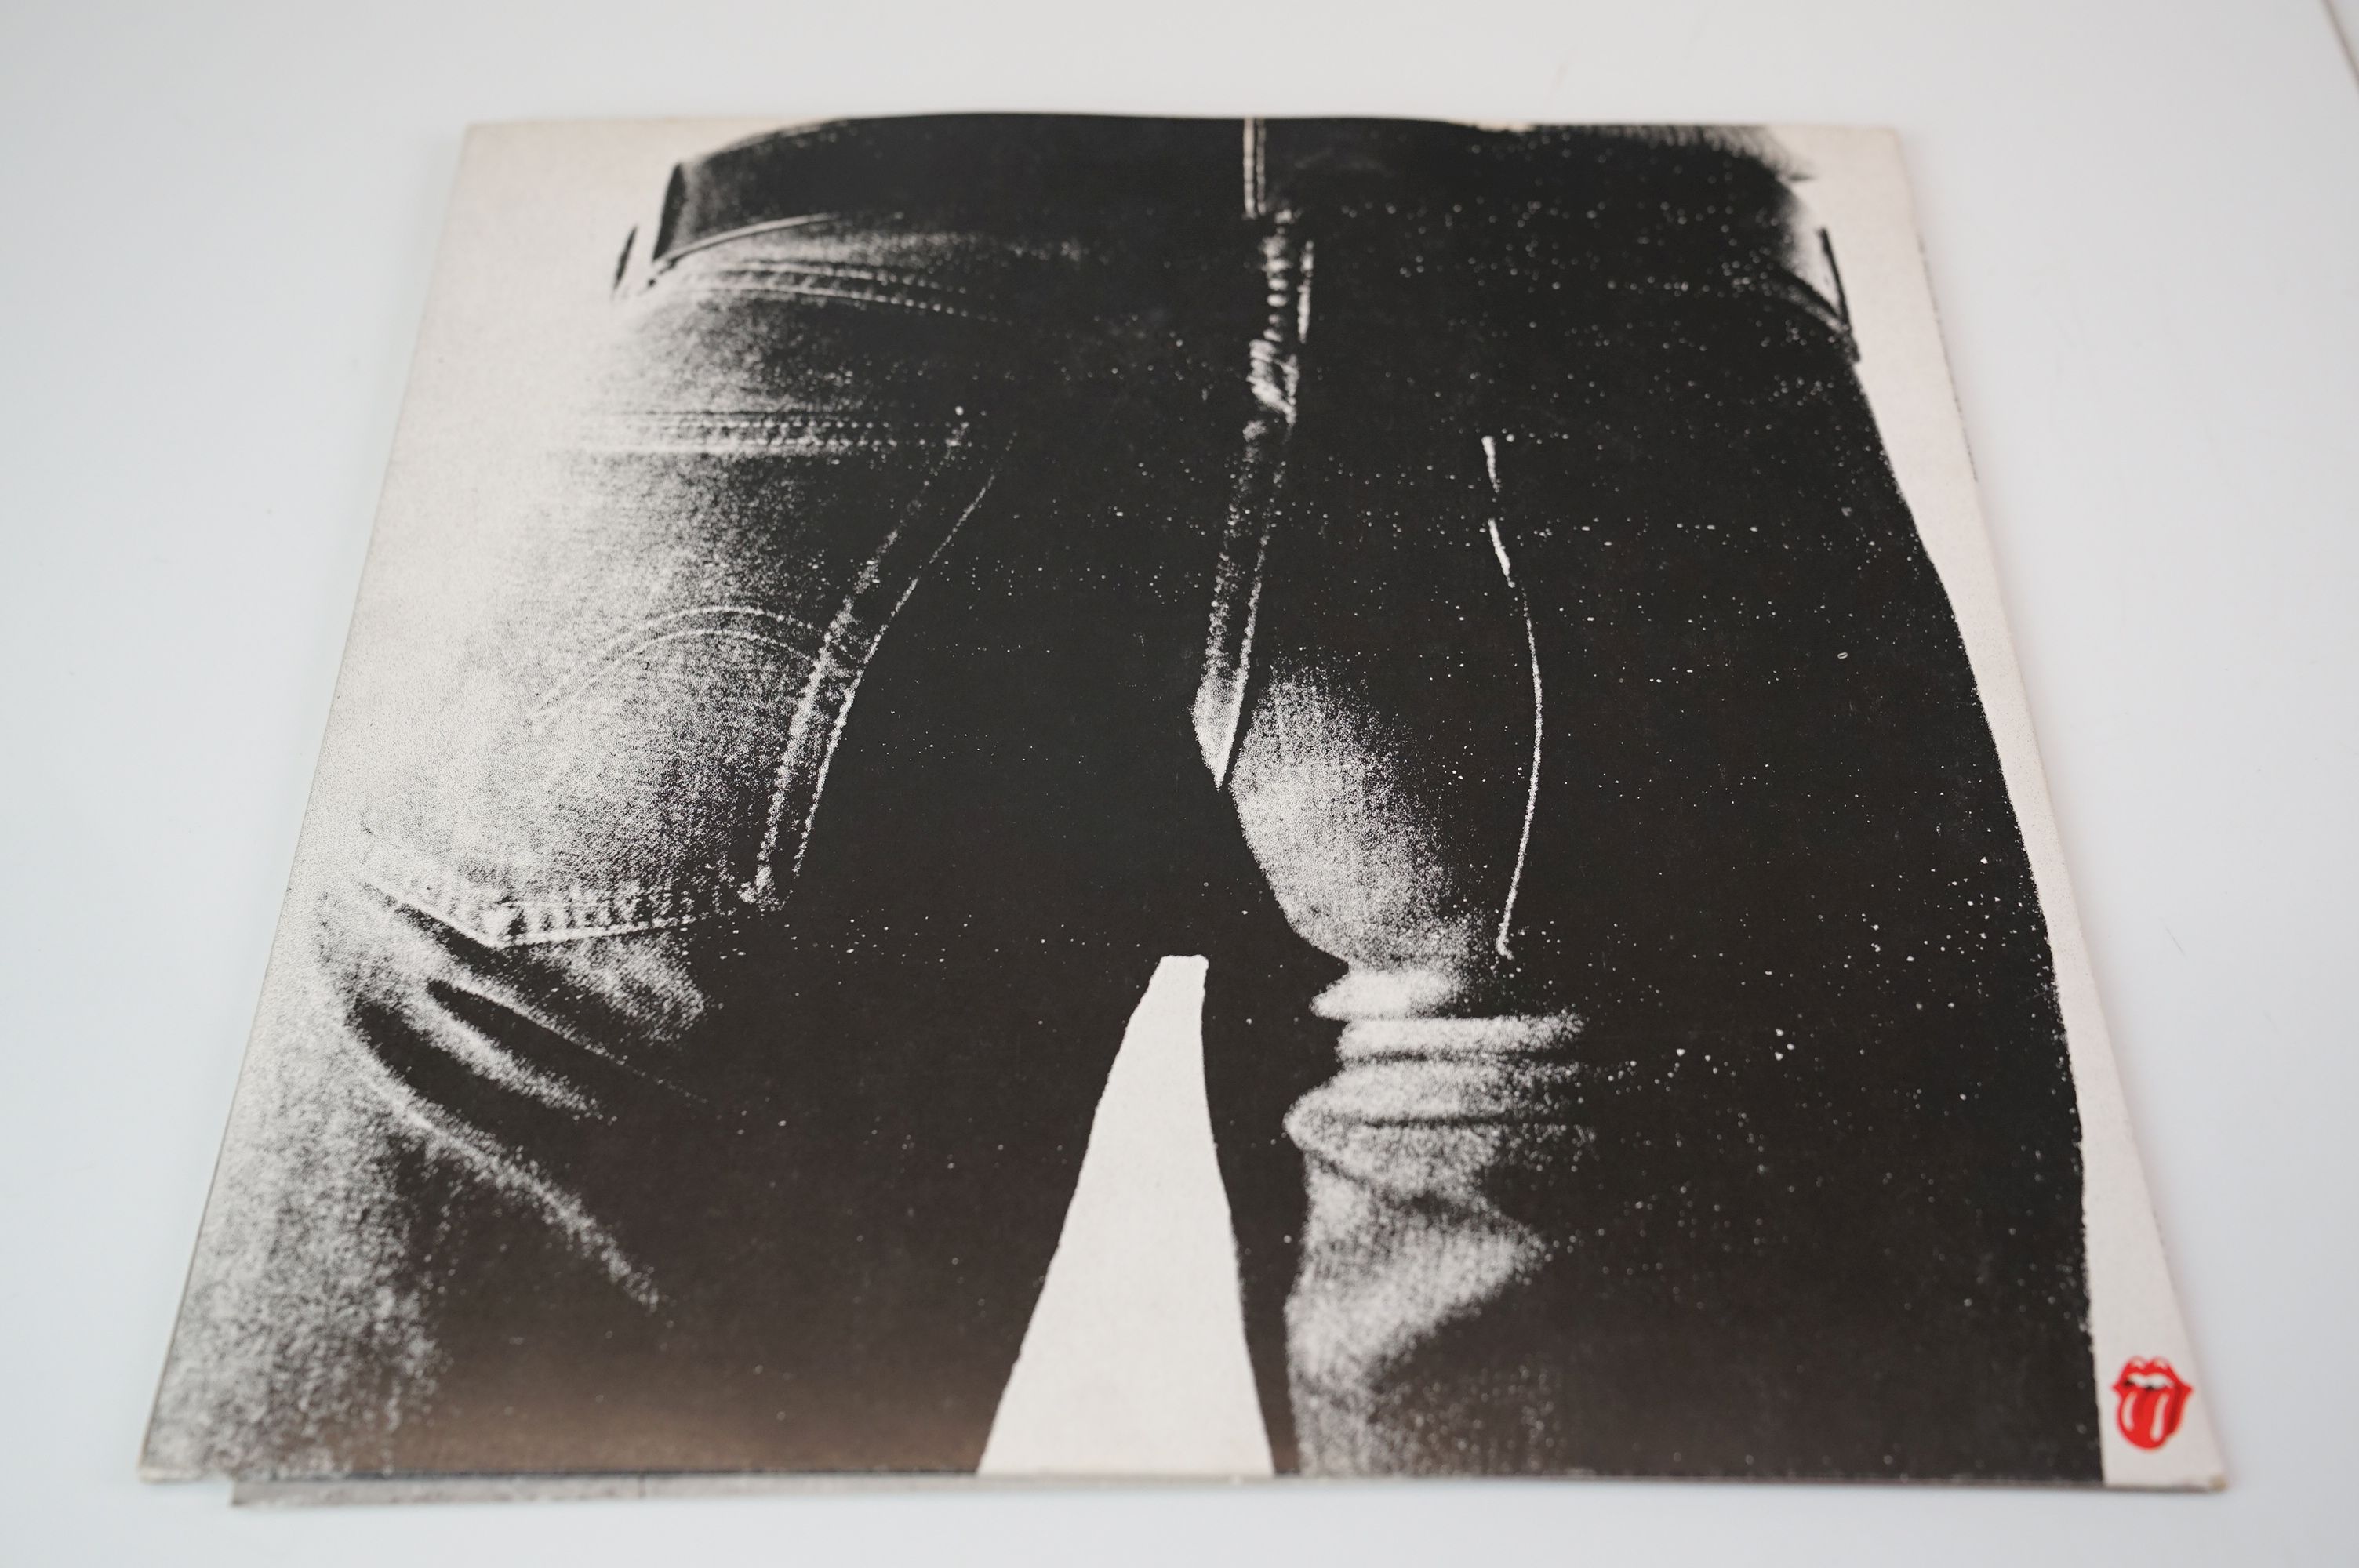 Vinyl - The Rolling Stones Sticky Fingers LP COC59100 stereo with insert, excellent - Image 3 of 9